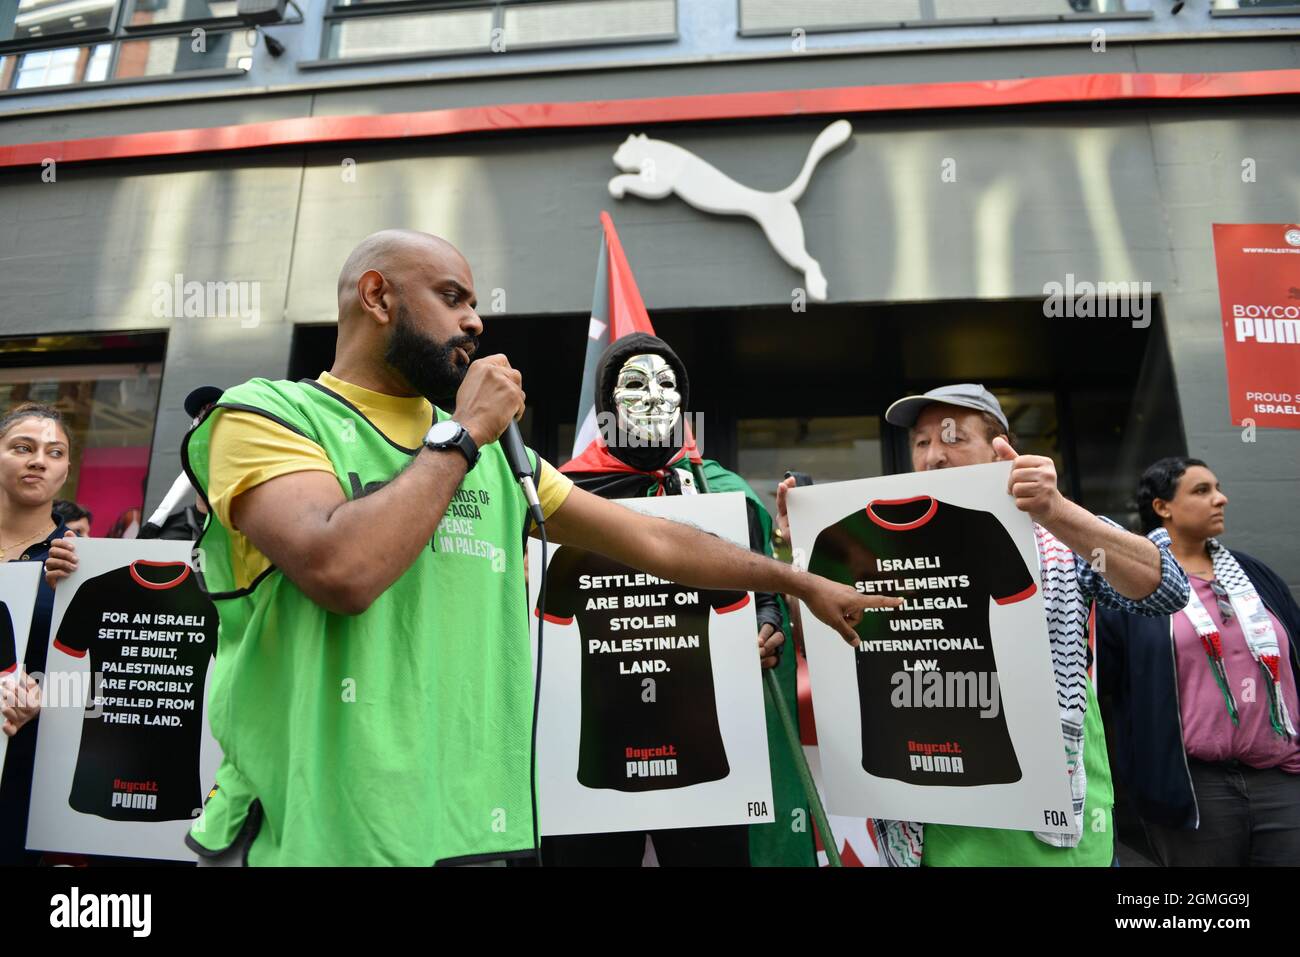 A protester speaking on a microphone, during the demonstration.Boycott Puma protest organised by Palestine Solidarity Campaign and FOA (Friends of Al Aqsa) at Puma flagship store on Carnaby Street, London. Activists demonstrated against Puma's sponsorship of the IFA (Israel Football Association). (Photo by Thomas Krych / SOPA Images/Sipa USA) Stock Photo